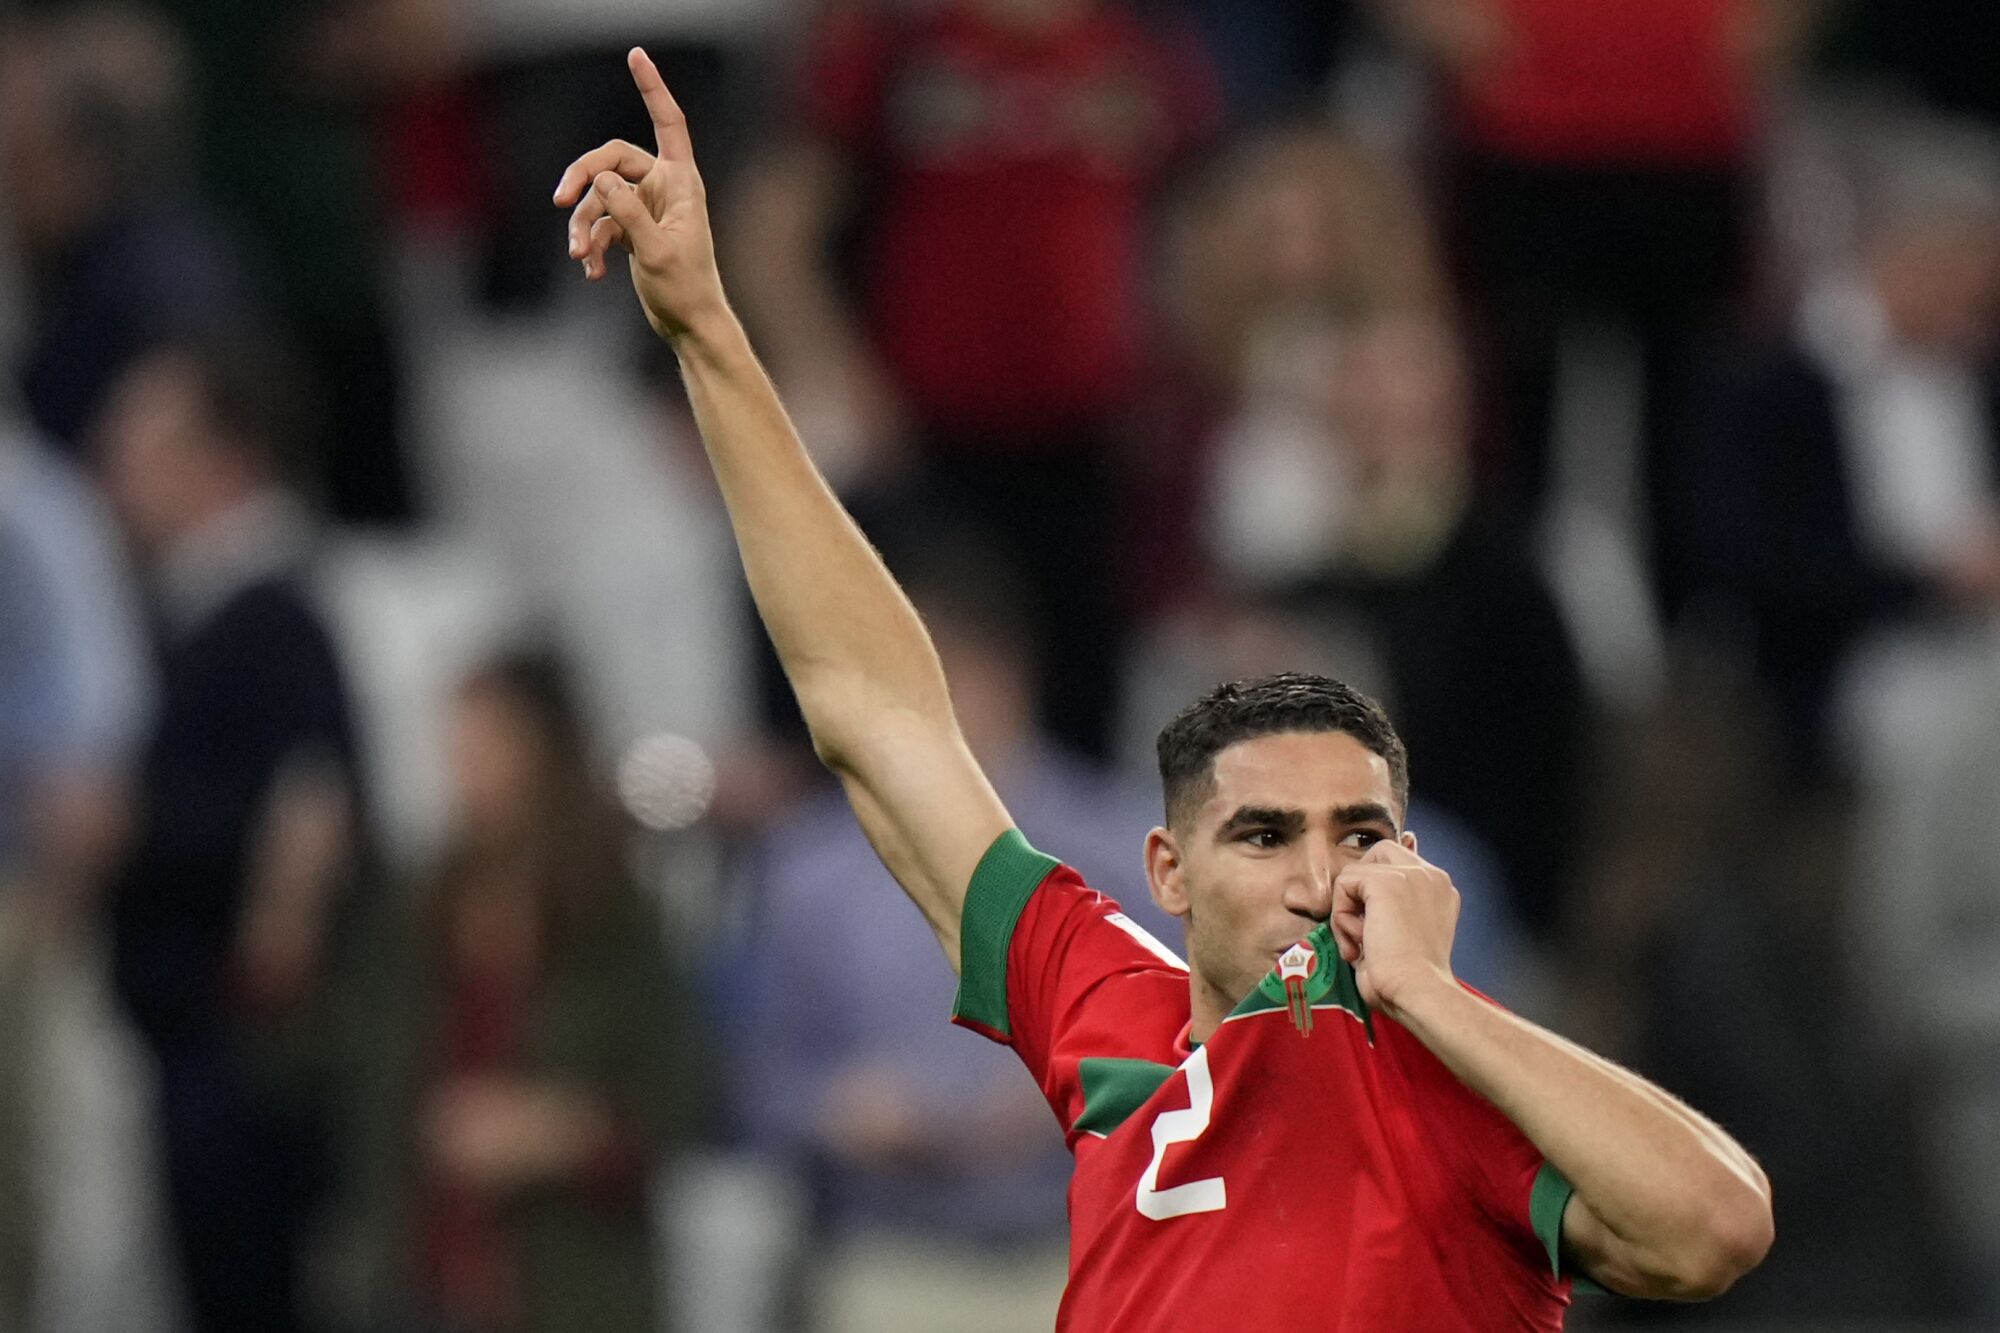 Morocco's Achraf Hakimi celebrates by kissing the crest on his jersey after hitting the winning penalty kick against Spain